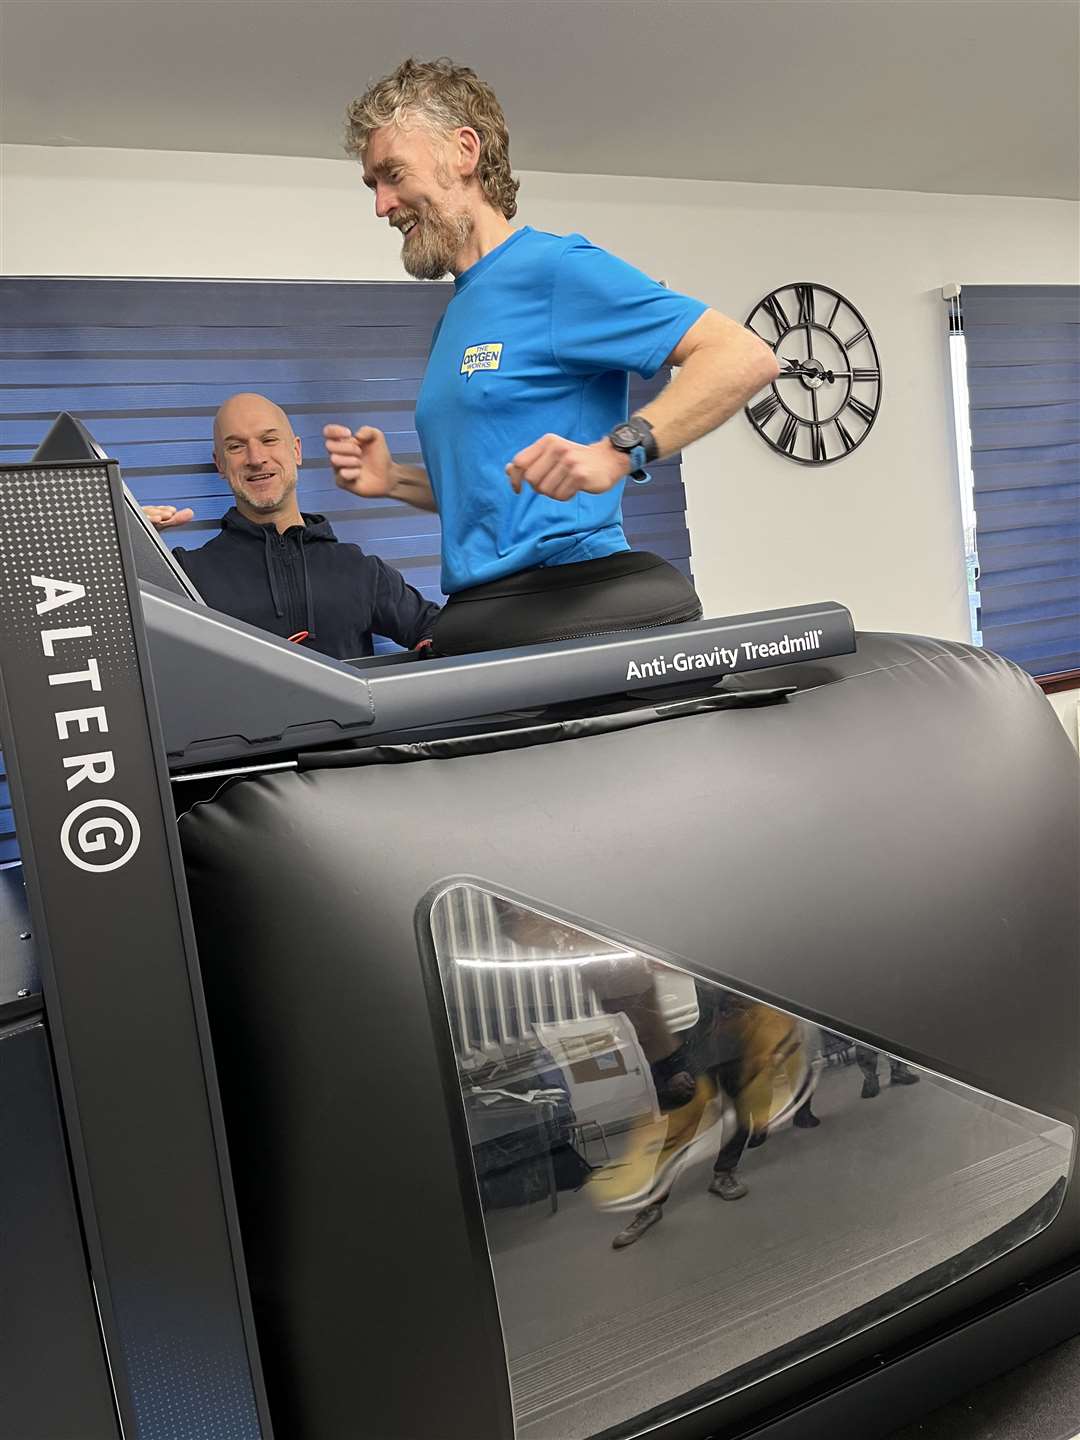 The anti-gravity treadmill at The Oxygen Works in Inverness. Vice chairman Mark Georgeson tries out the machine.